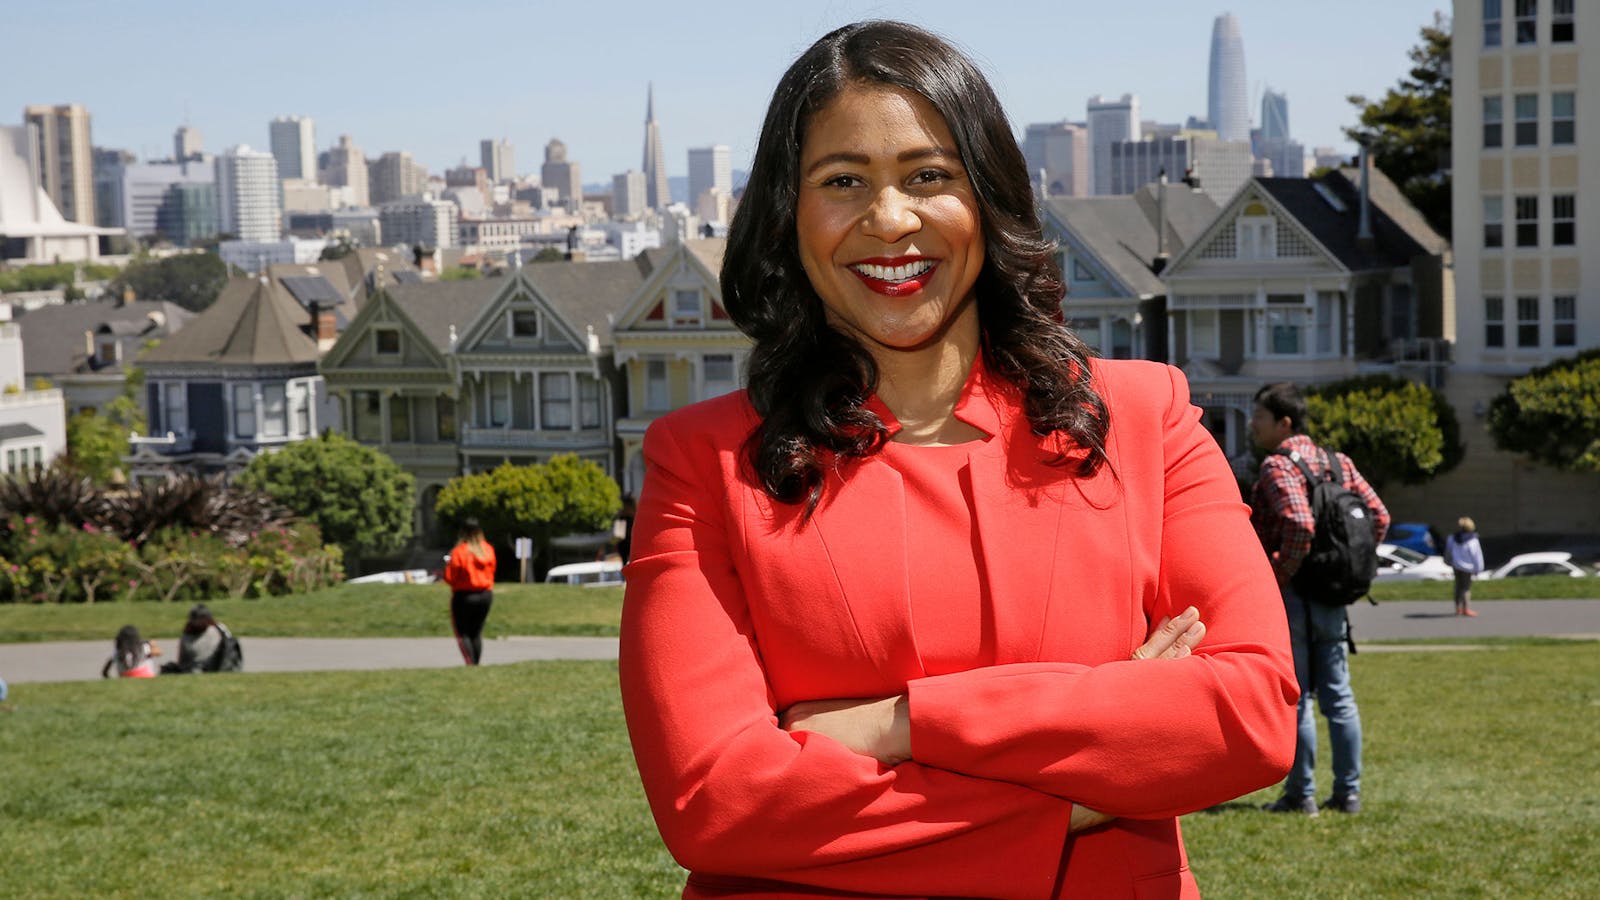 San Francisco mayoral candidate and Board of Supervisors President London Breed. Photo: AP